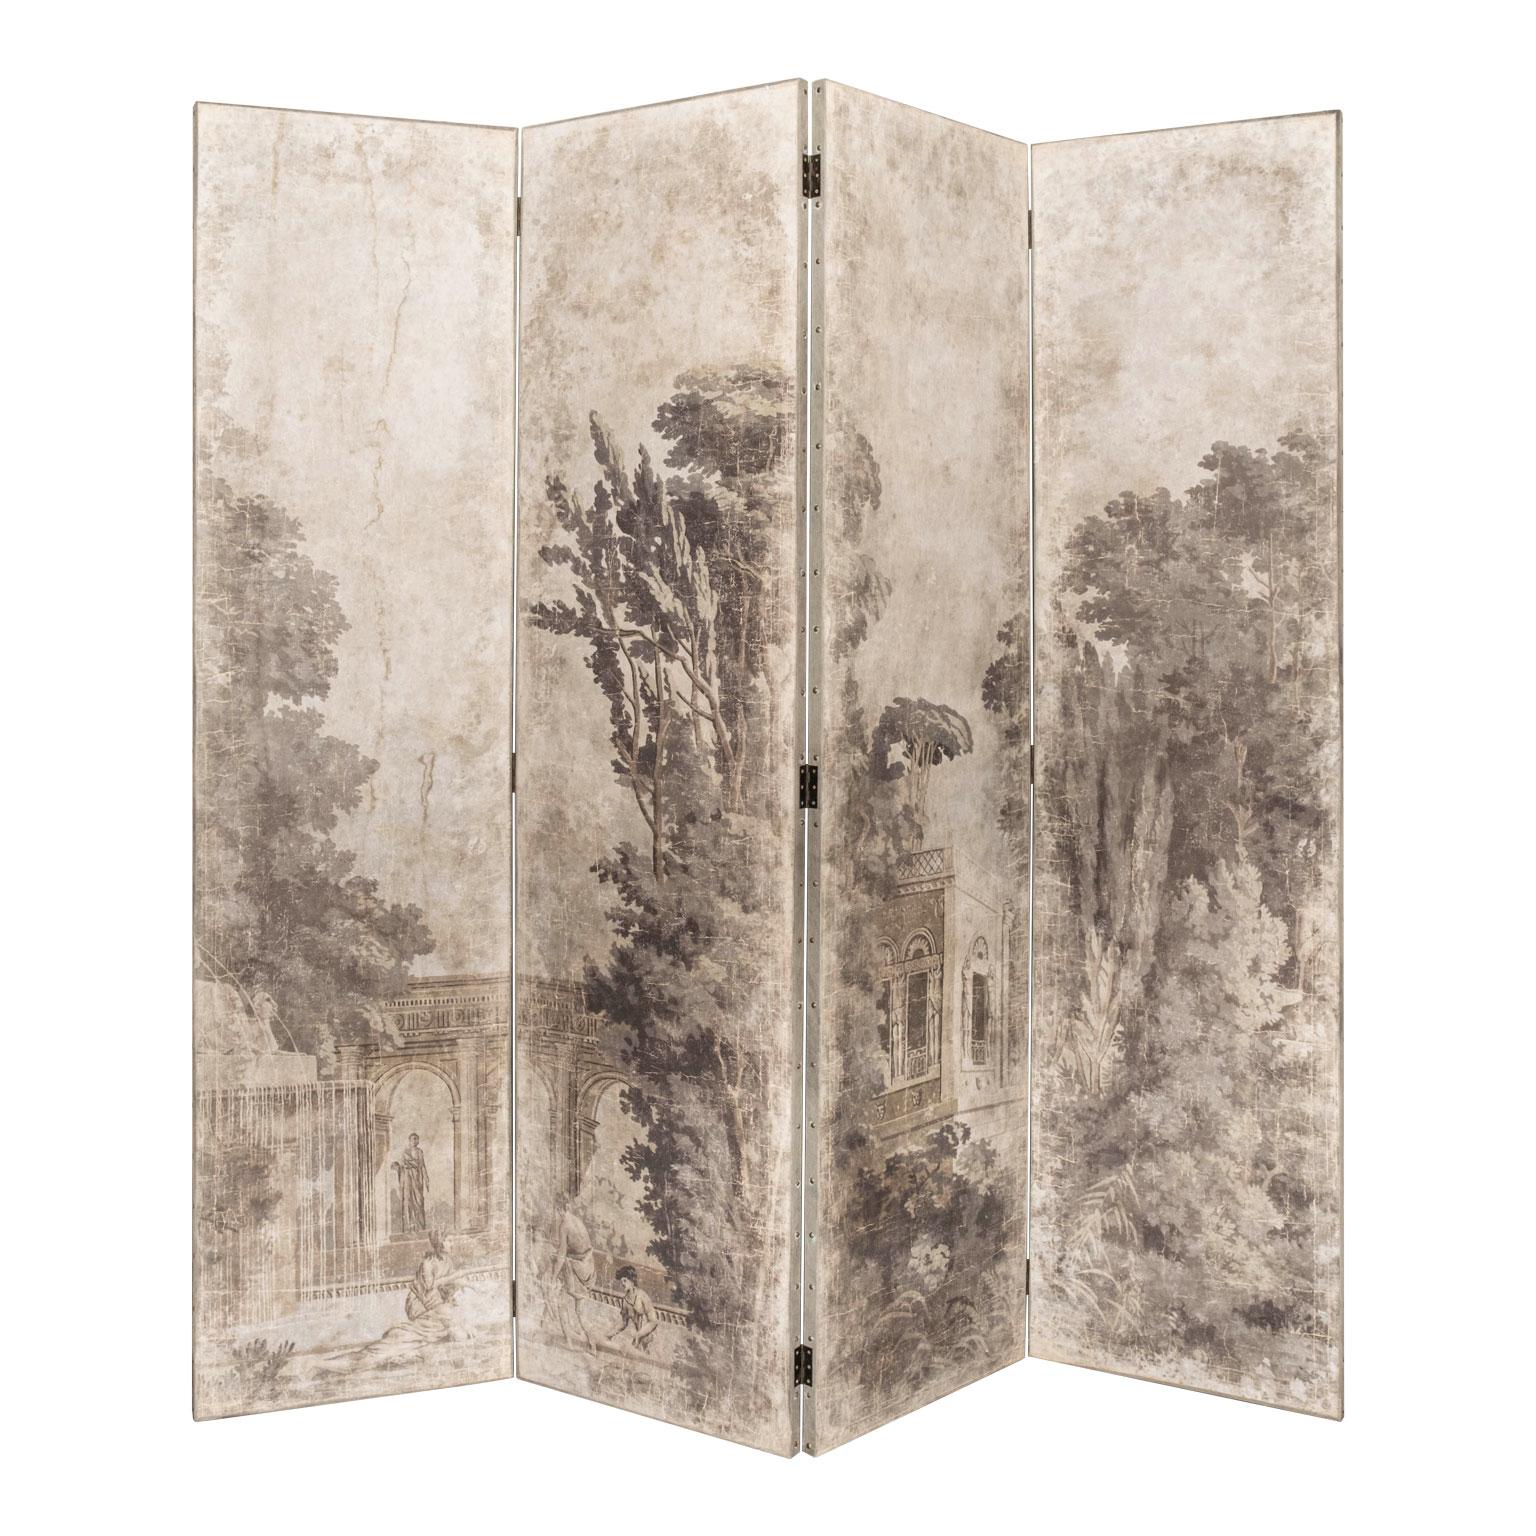 Italian Neoclassical Style Screen / Room Divider
Italian screen.
This lovely Italian Neoclassical style 4 panel Grasaille folding screen or room divider has beautiful outdoor scenes with foliage.
This fantastic screen is hand decorated on both sides